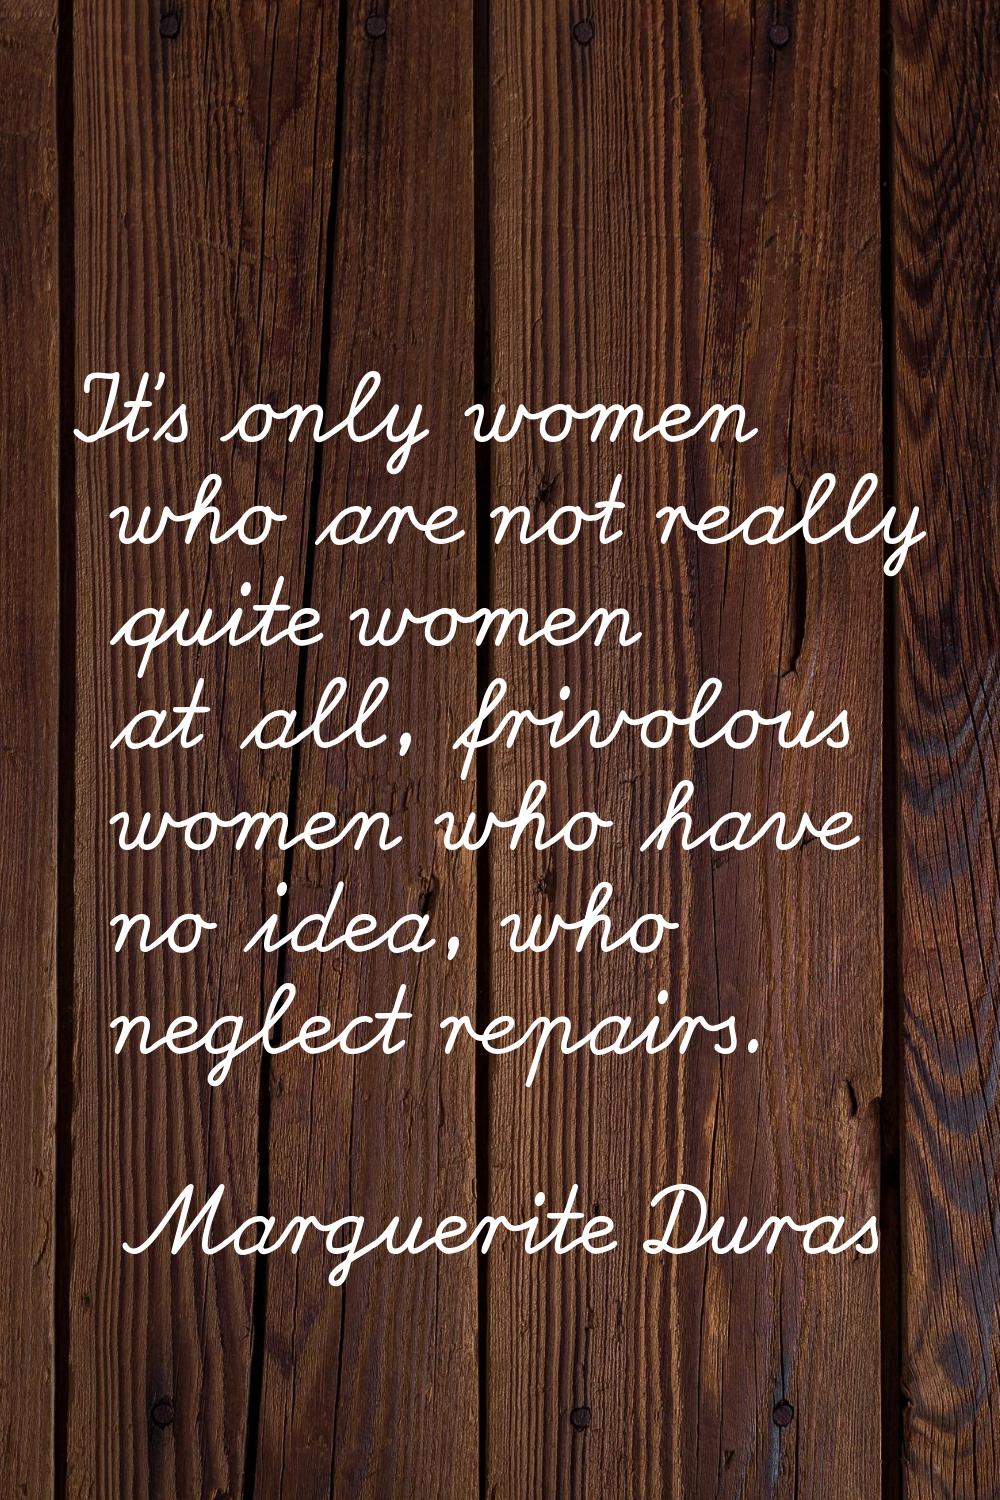 It's only women who are not really quite women at all, frivolous women who have no idea, who neglec